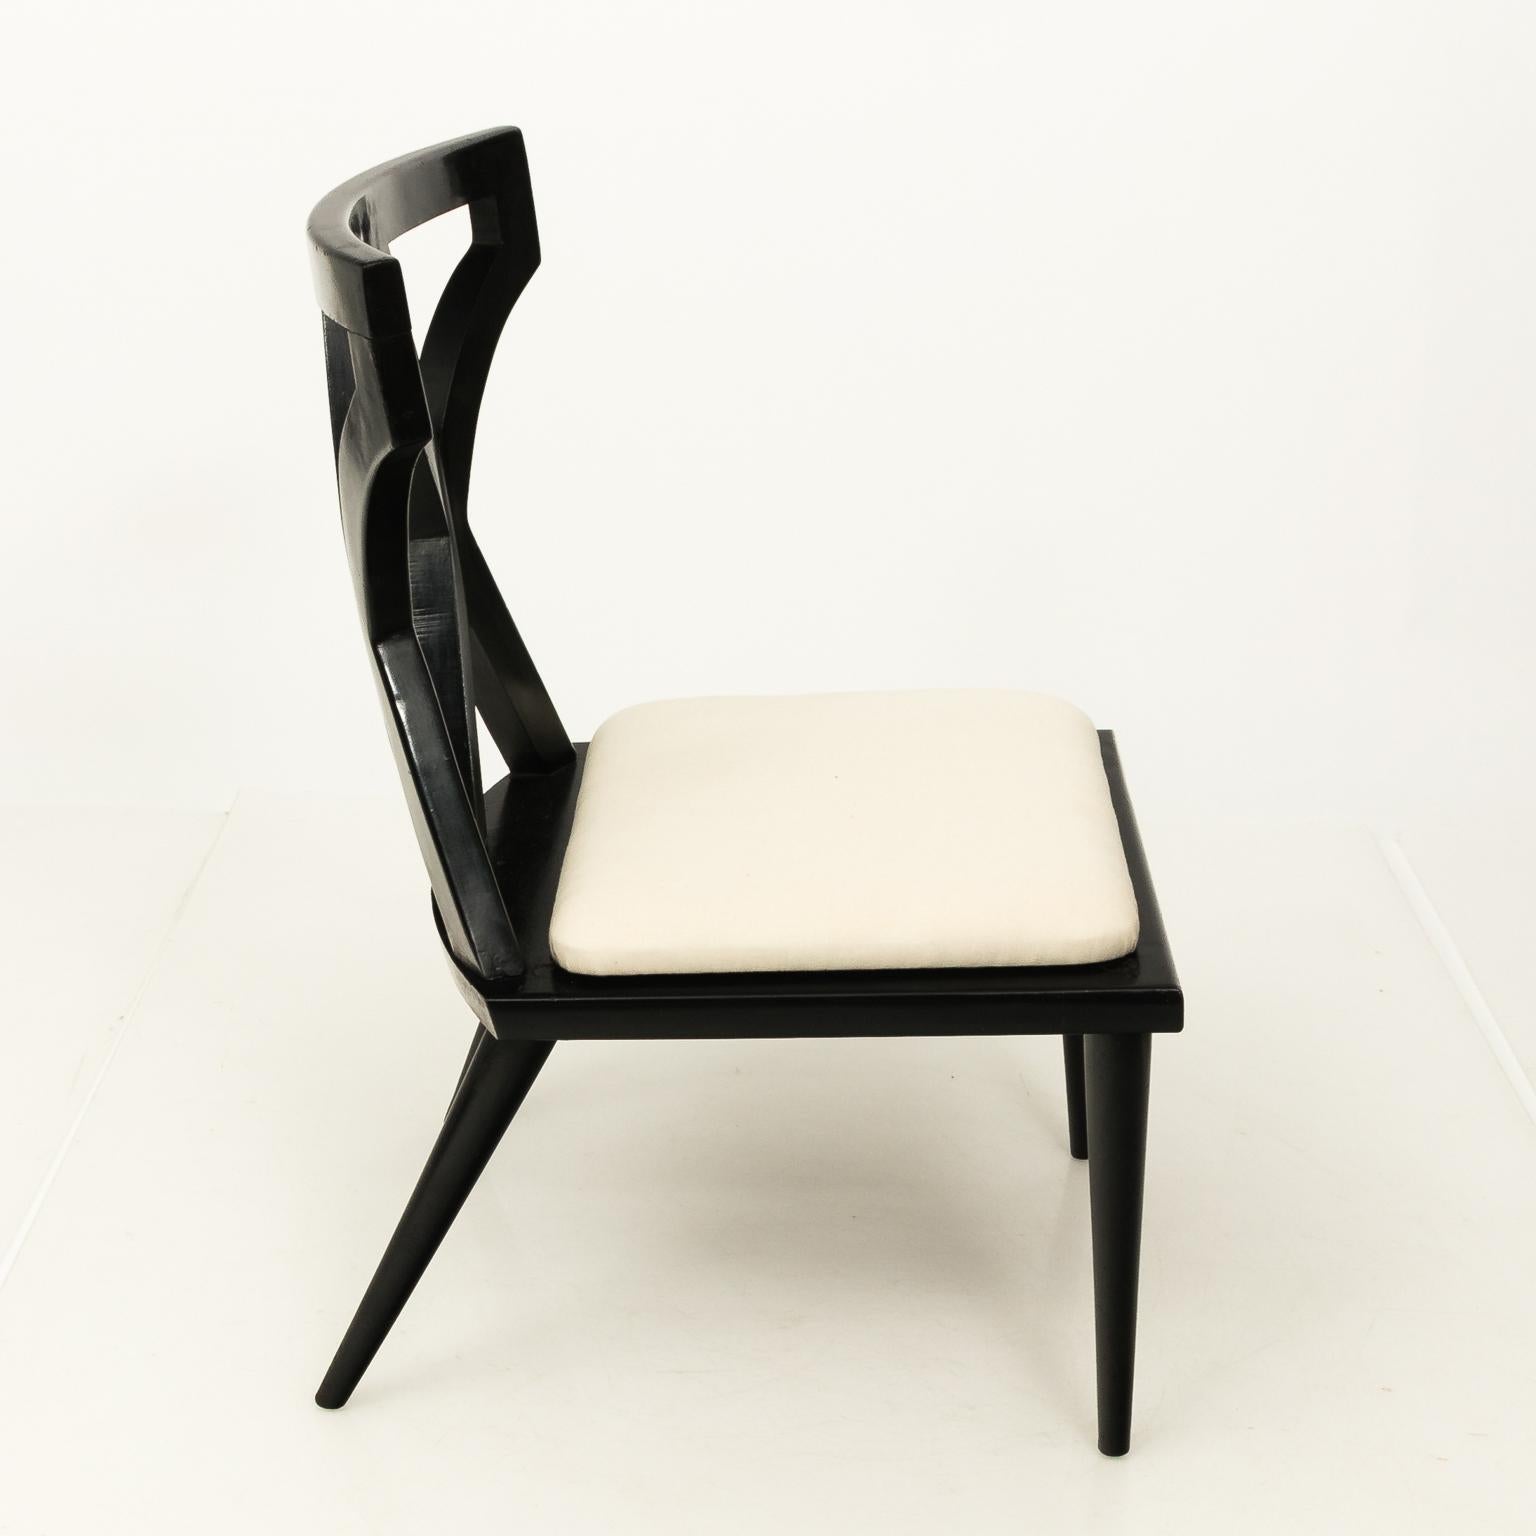 Wood Pair of Mid-Century Modern French Black Lacquered Side Chairs, circa 1960s